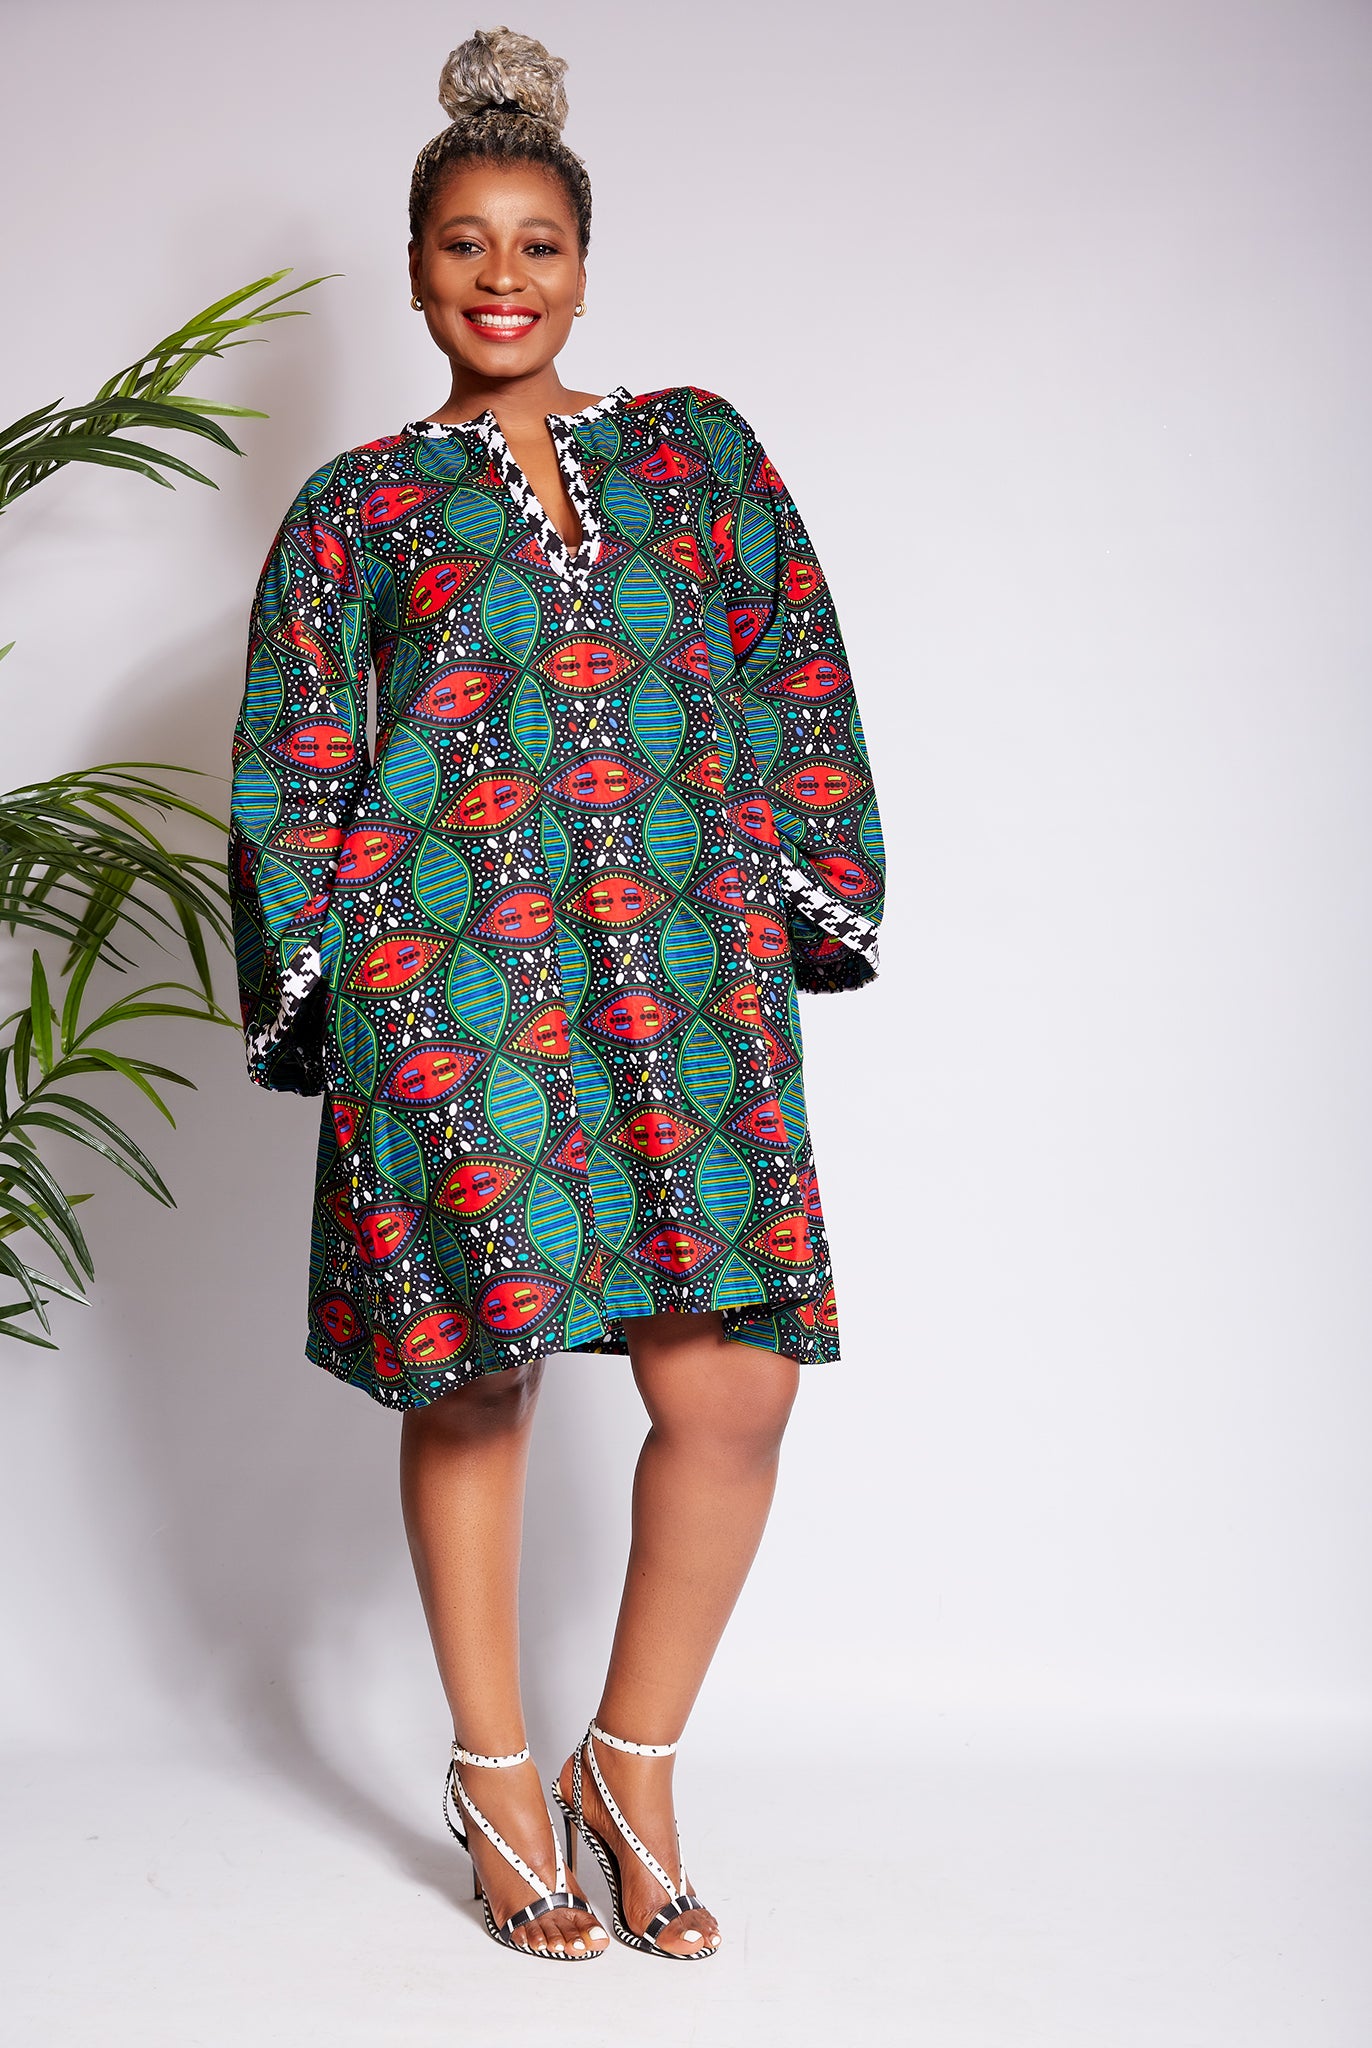 Up to 70% off African Print Clothing